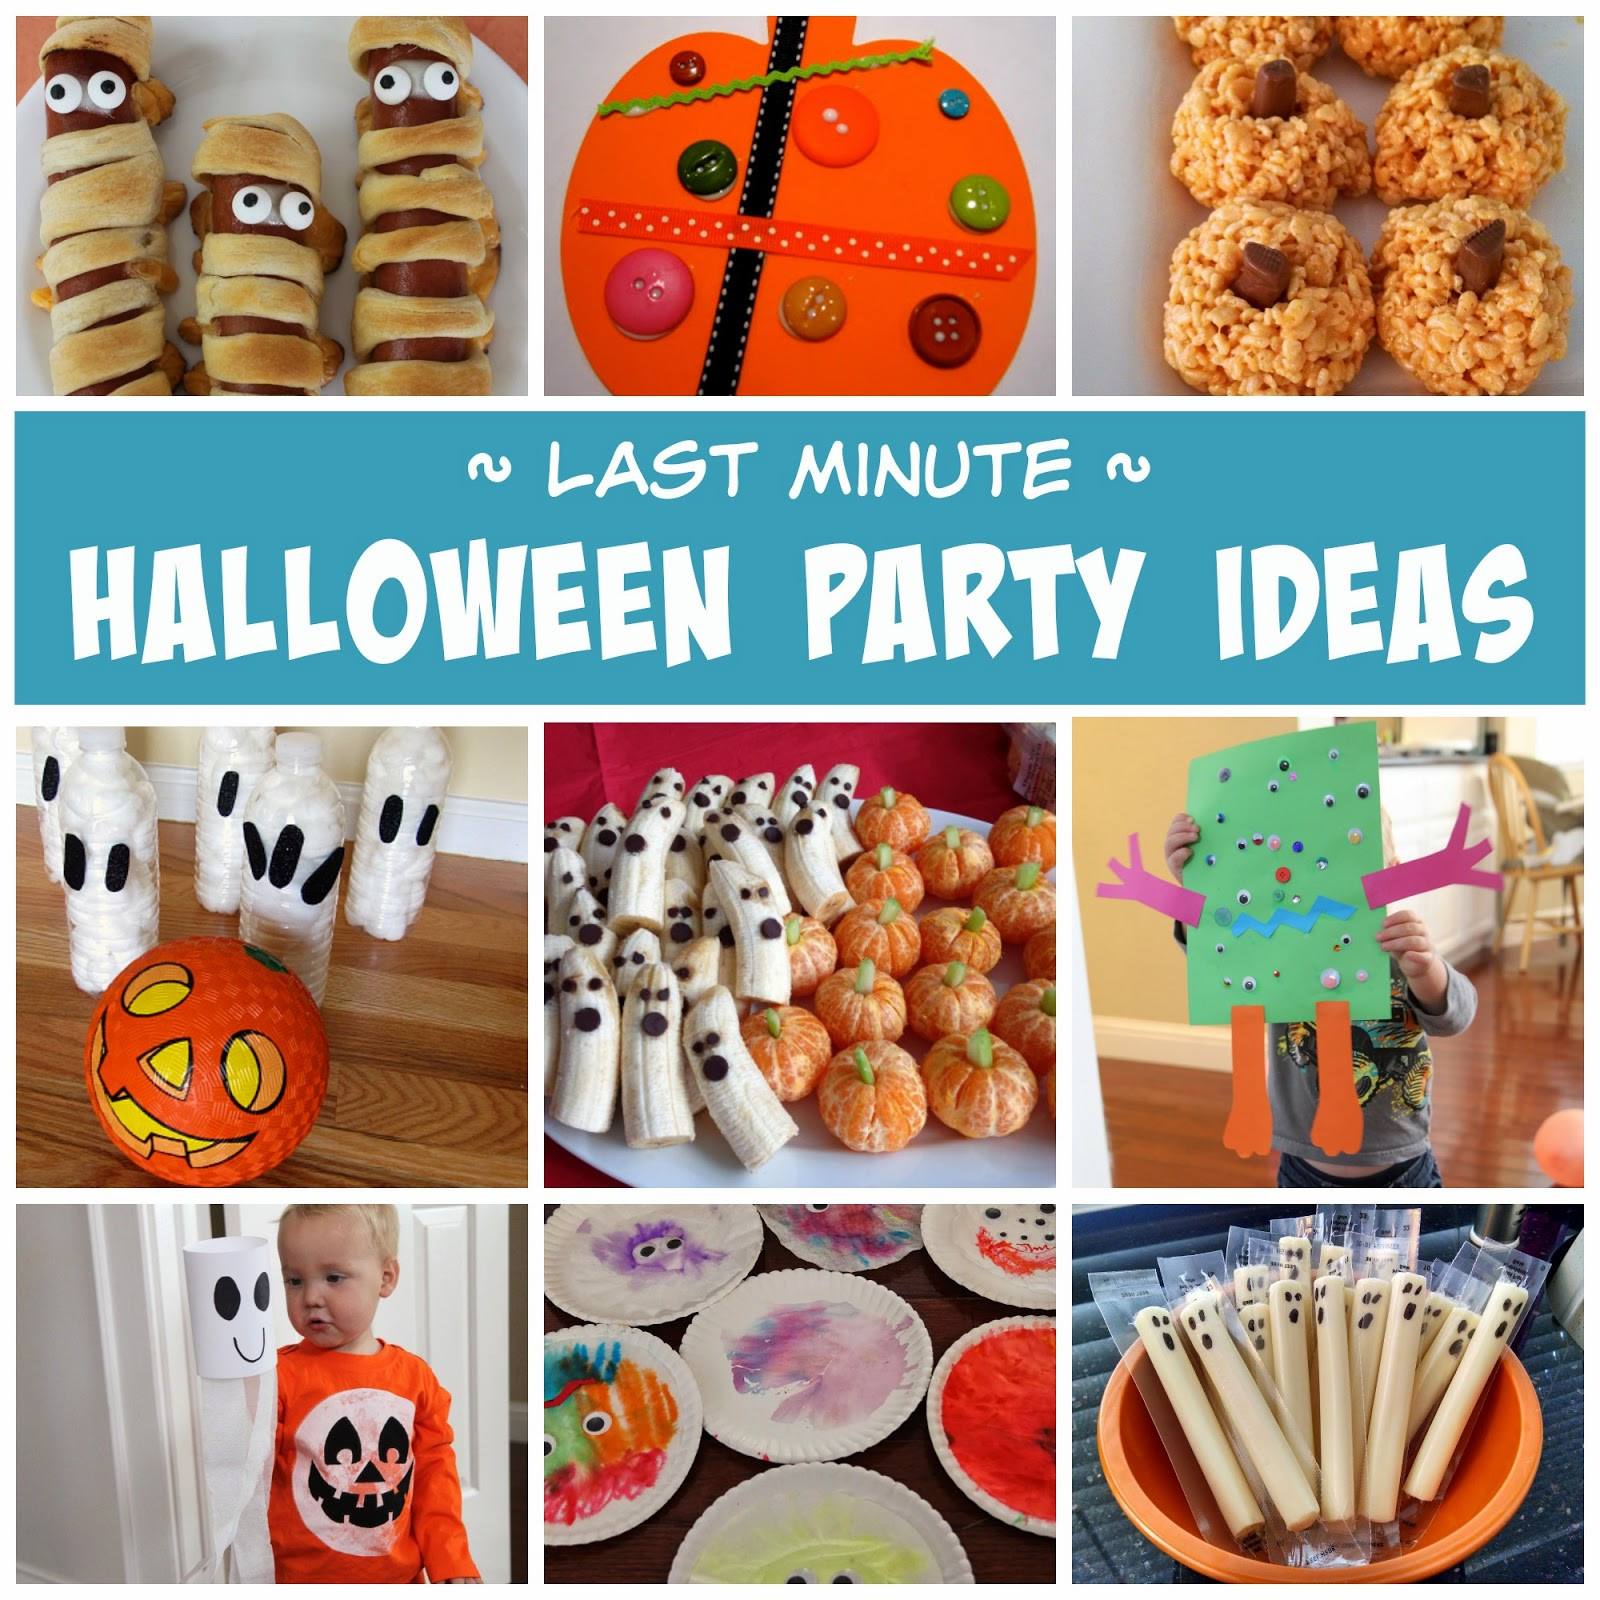 Baby Halloween Party Ideas
 Toddler Approved Last Minute Halloween Party Ideas